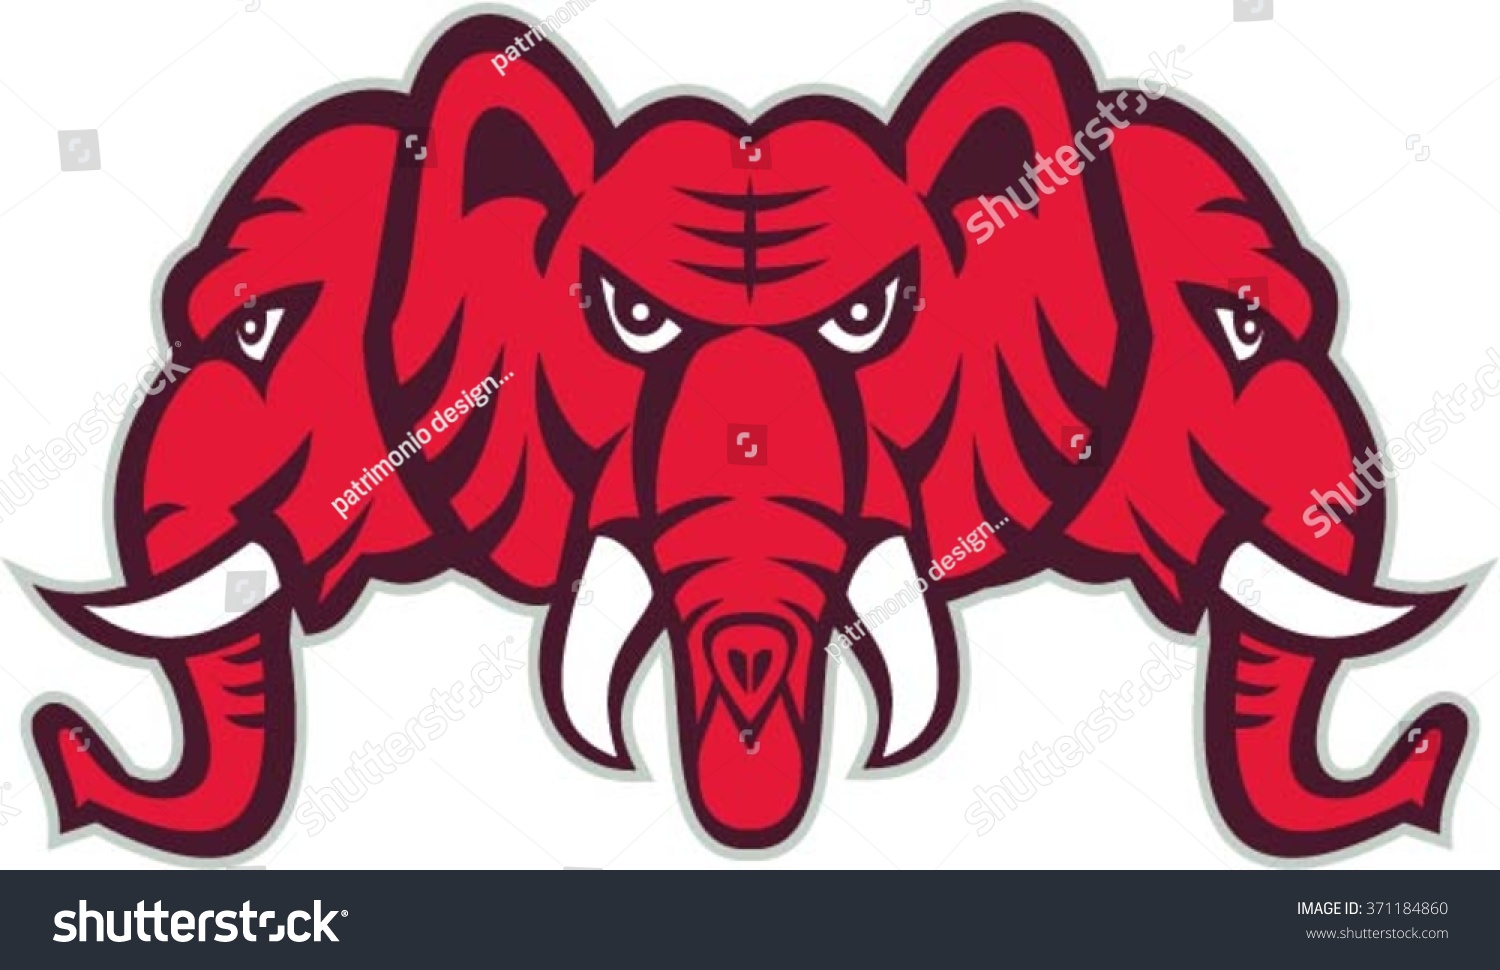 SVG of Illustration of a three headed elephant with tusk set on isolated white background done in retro style.  svg